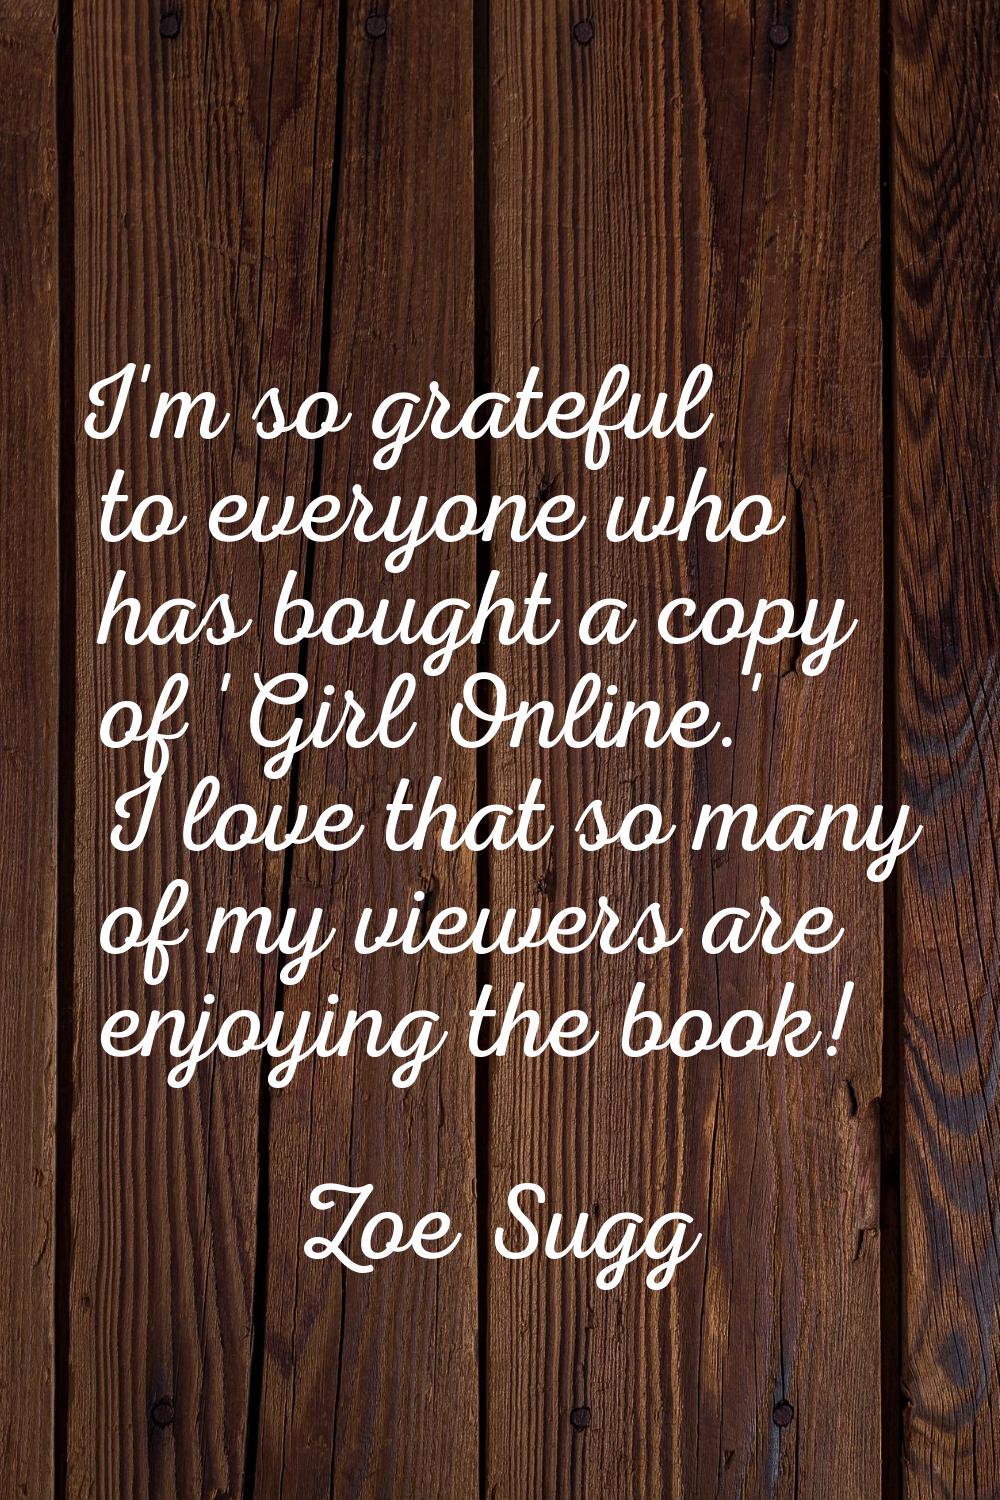 I'm so grateful to everyone who has bought a copy of 'Girl Online.' I love that so many of my viewe